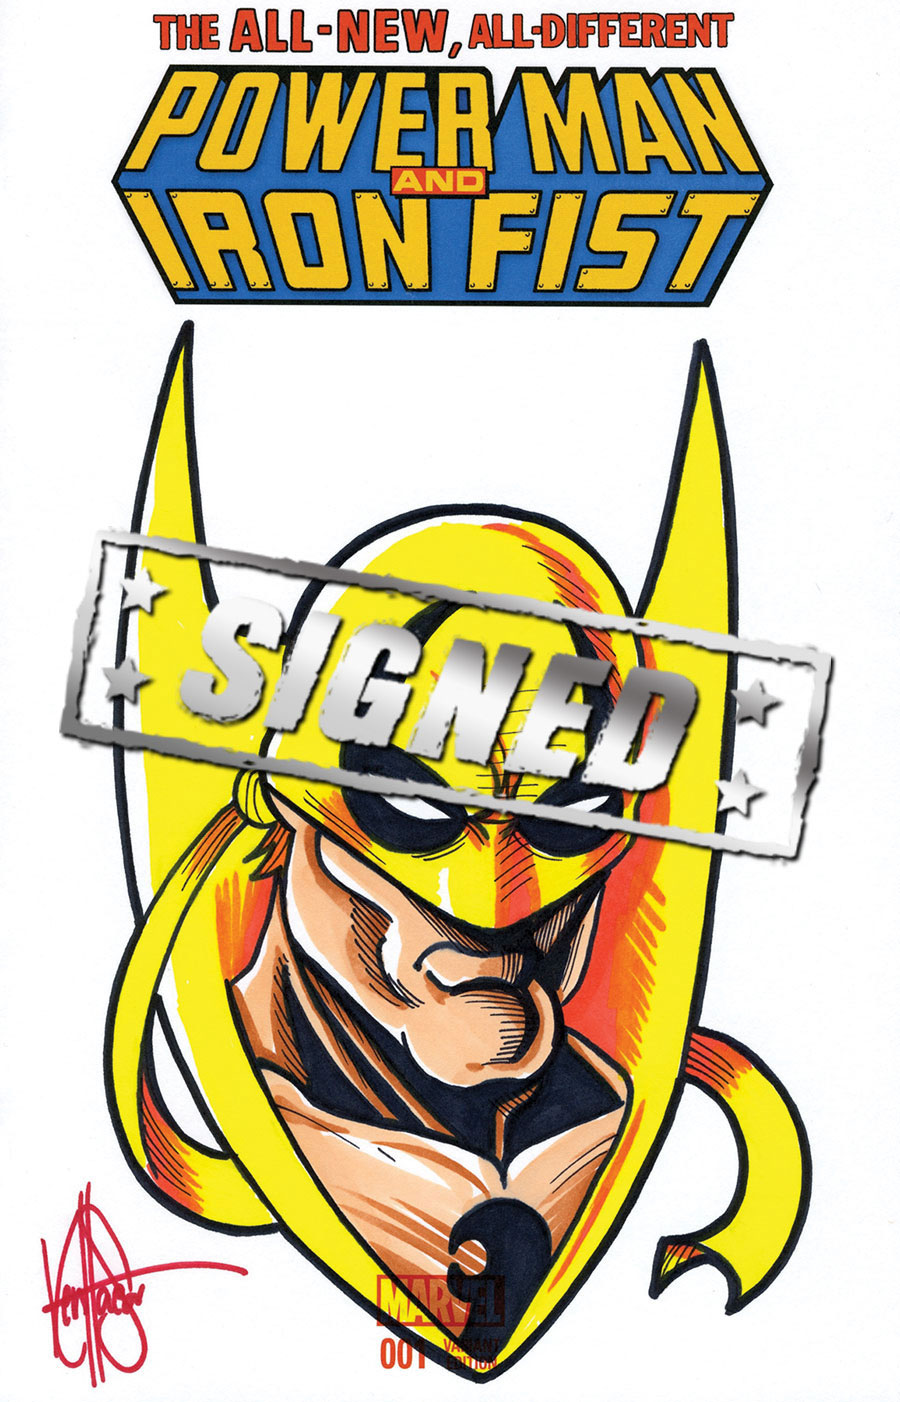 Power Man And Iron Fist Vol 3 #1 Cover L DF Blank Variant Commissioned Cover Art Signed & Remarked By Ken Haeser With An Iron Fist Hand-Drawn Sketch